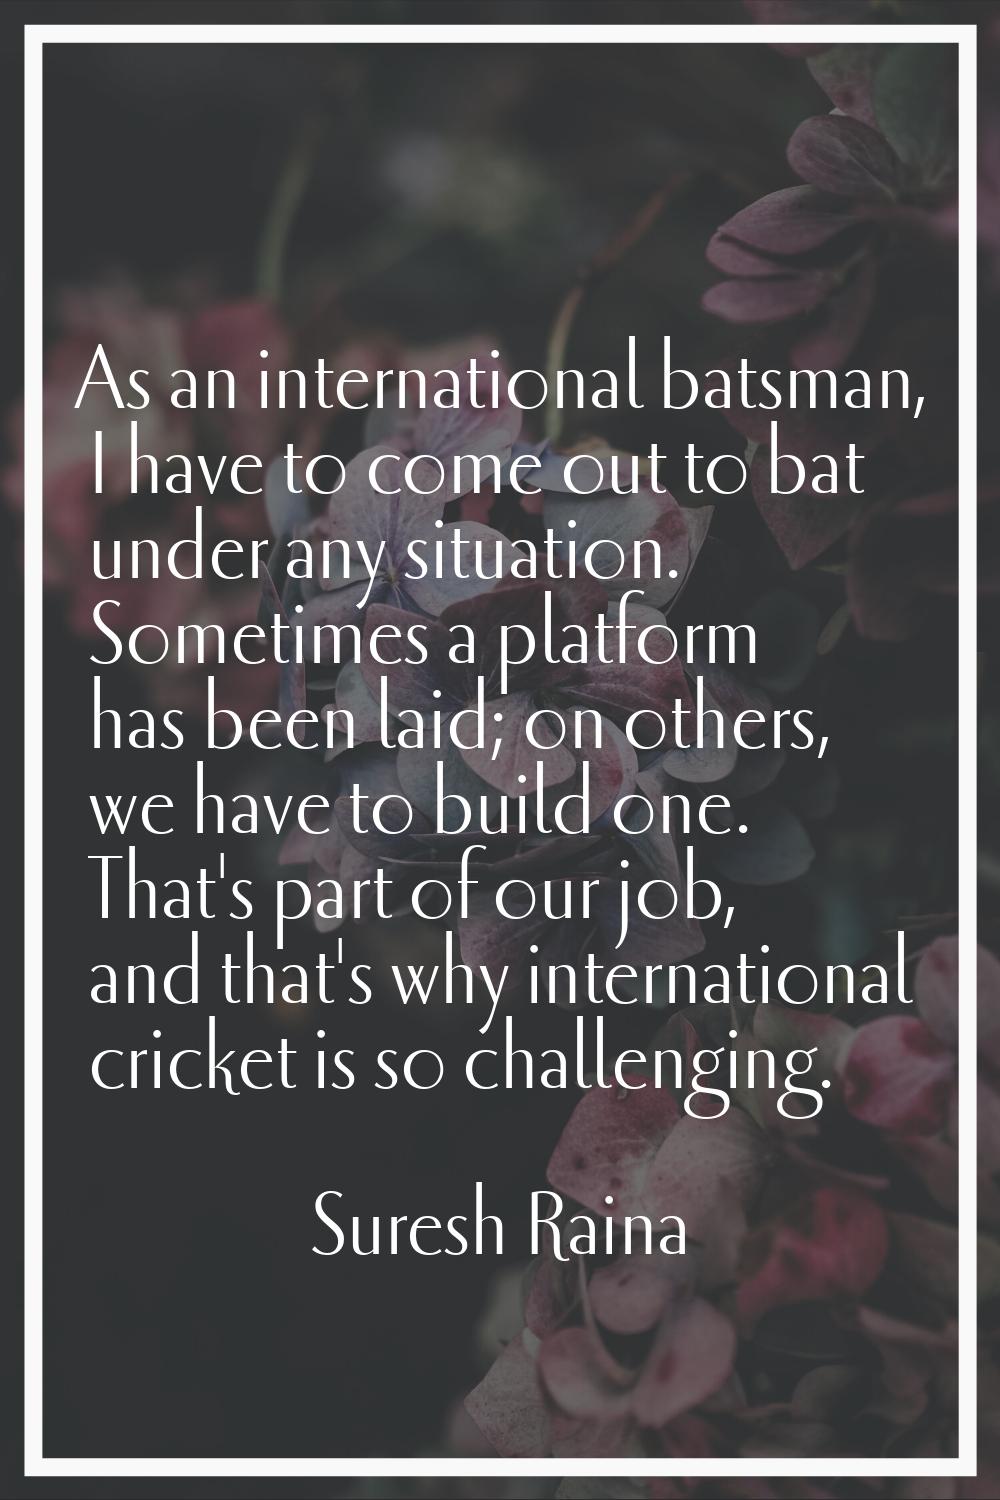 As an international batsman, I have to come out to bat under any situation. Sometimes a platform ha